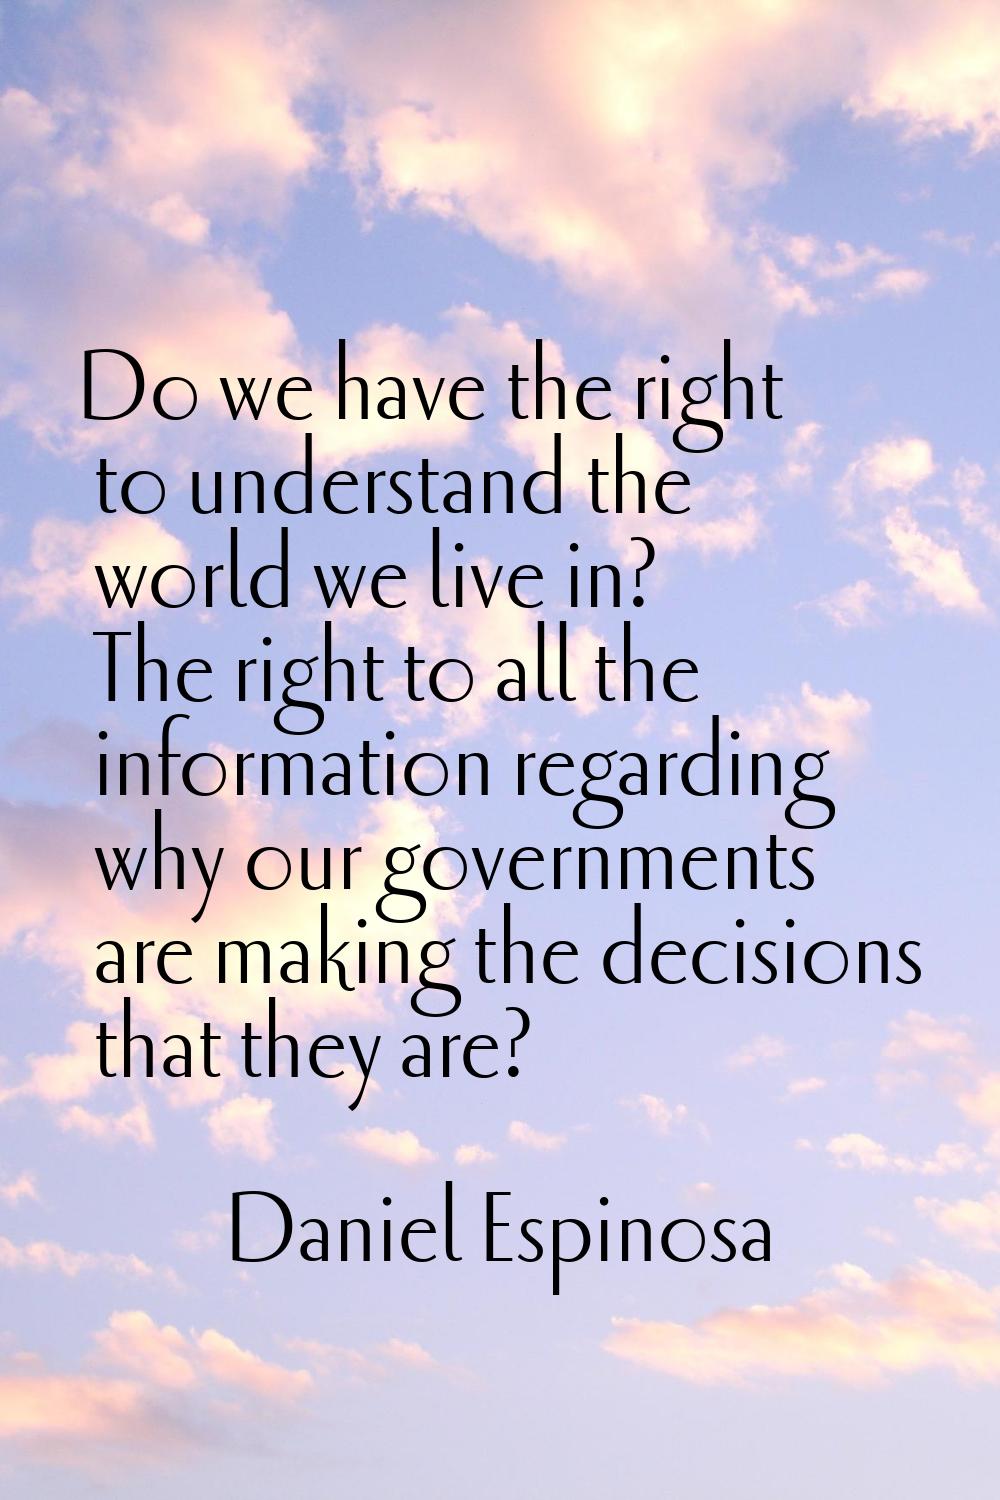 Do we have the right to understand the world we live in? The right to all the information regarding